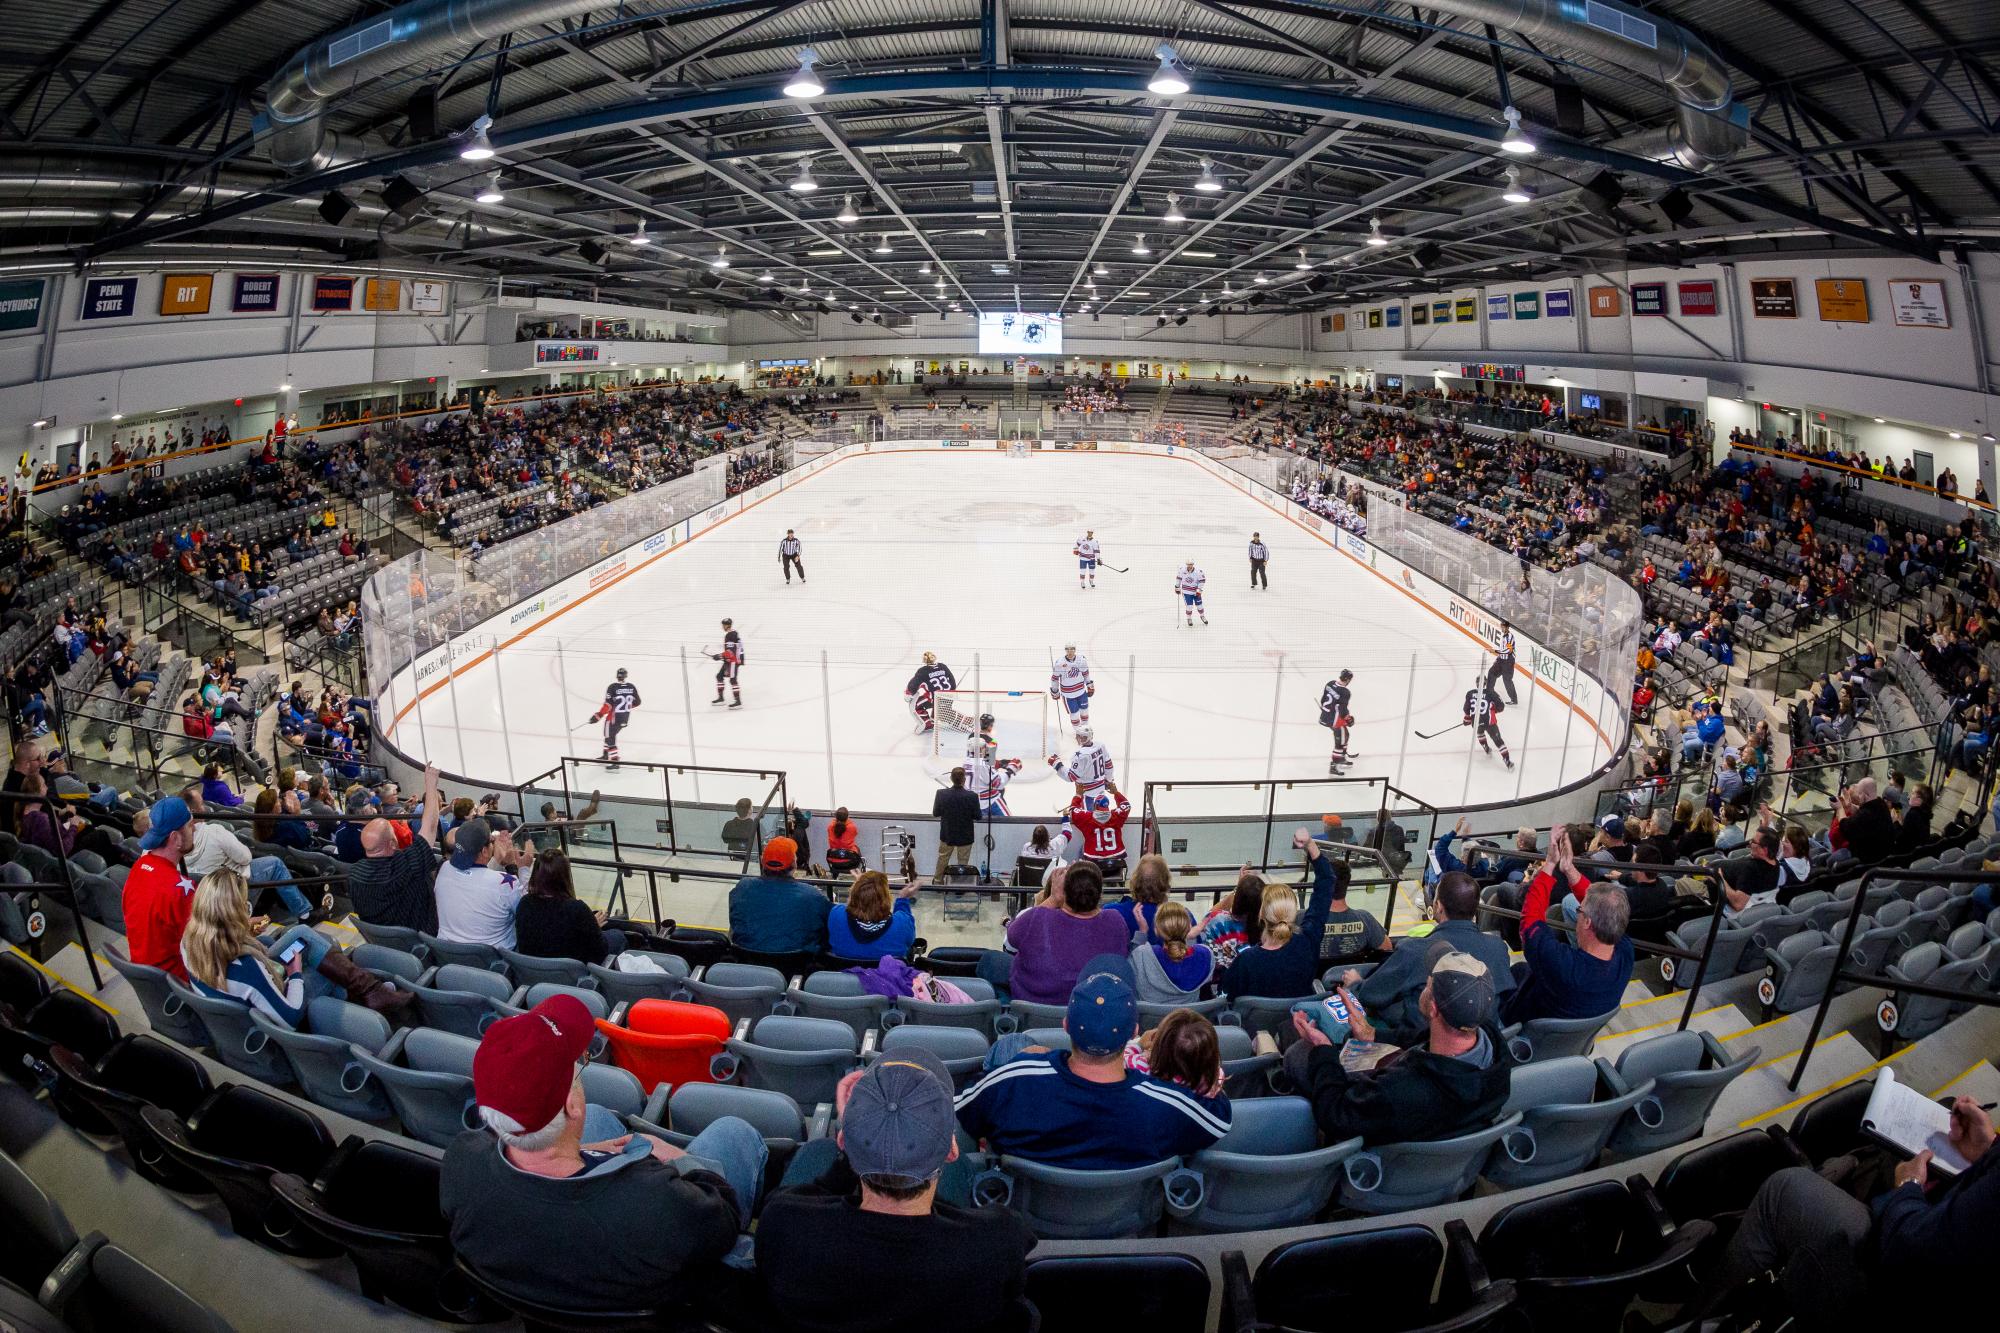 An overview of the Gene Polisseni Center during the Rochester Americans game on Oct. 1, 2015. Photograph by Rob Rauchwerger.